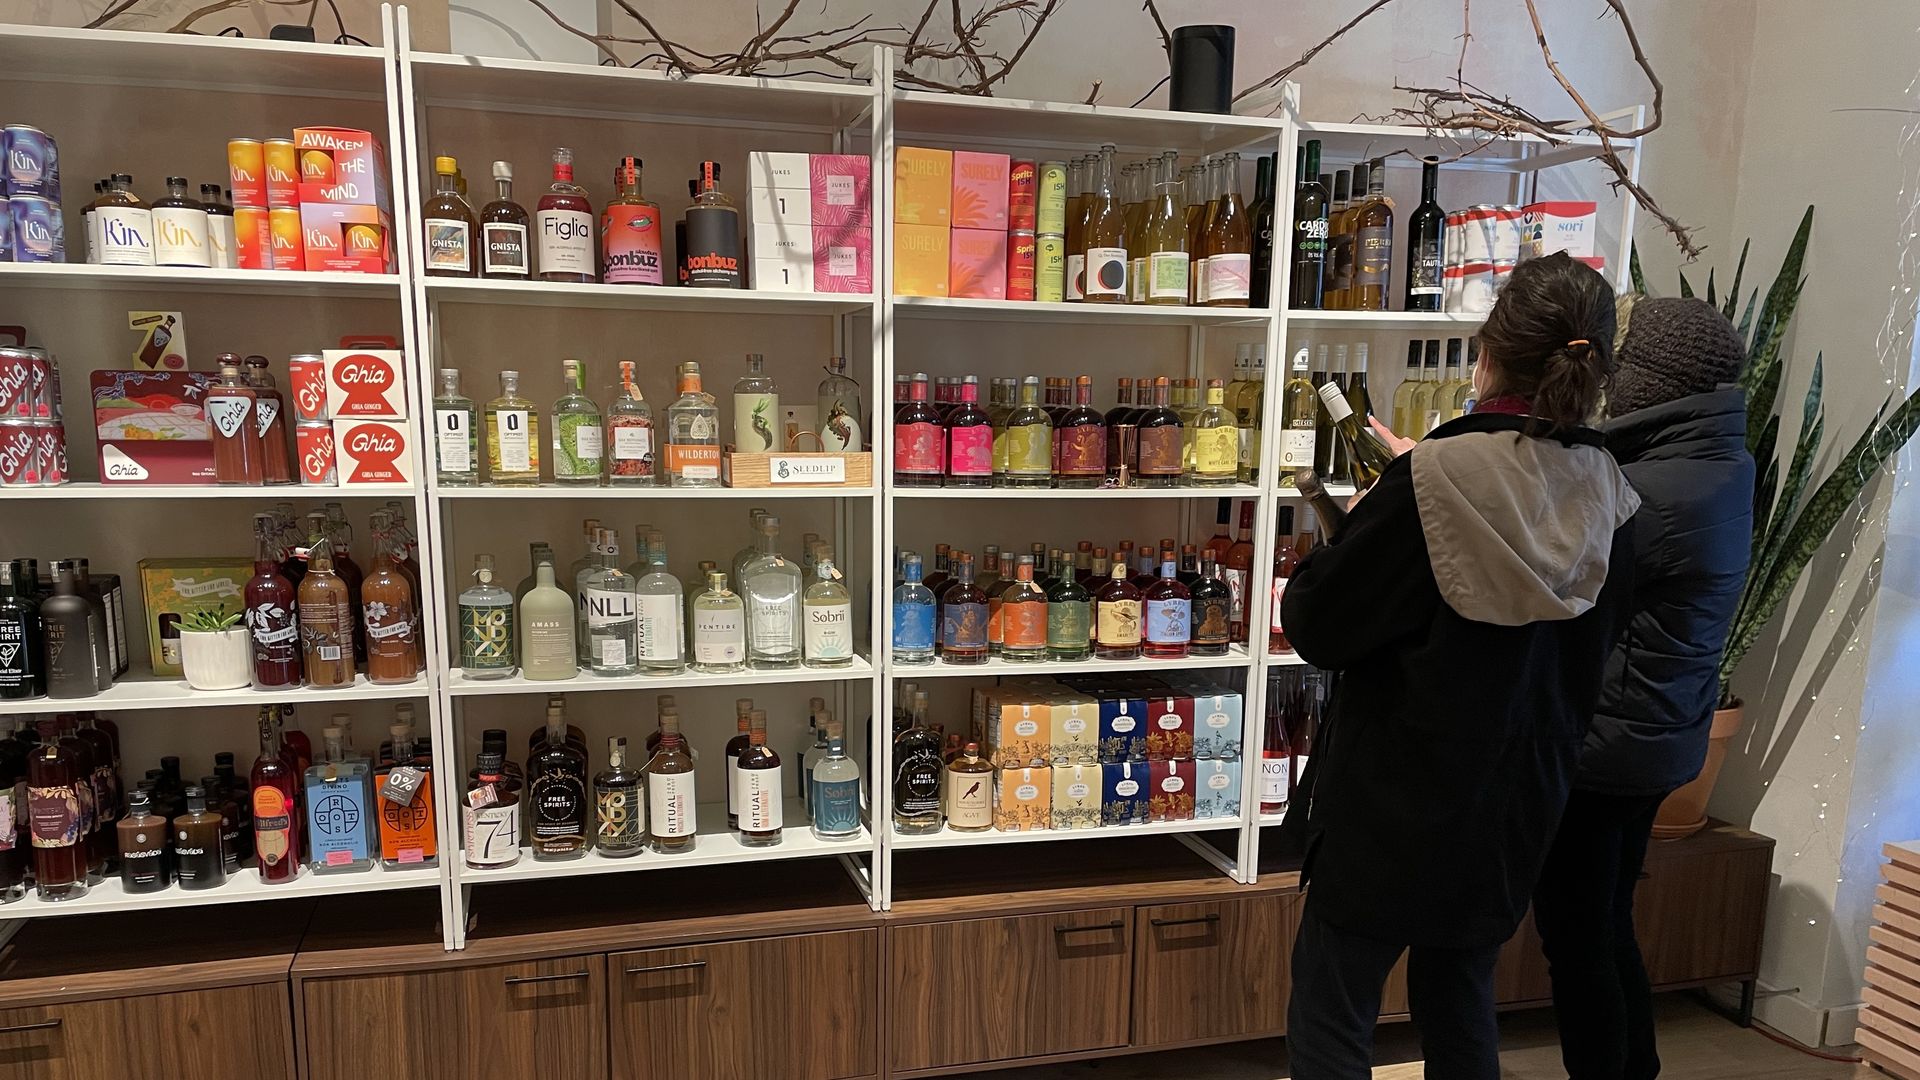 Shelves in a store filled with non-alcoholic faux booze drinks